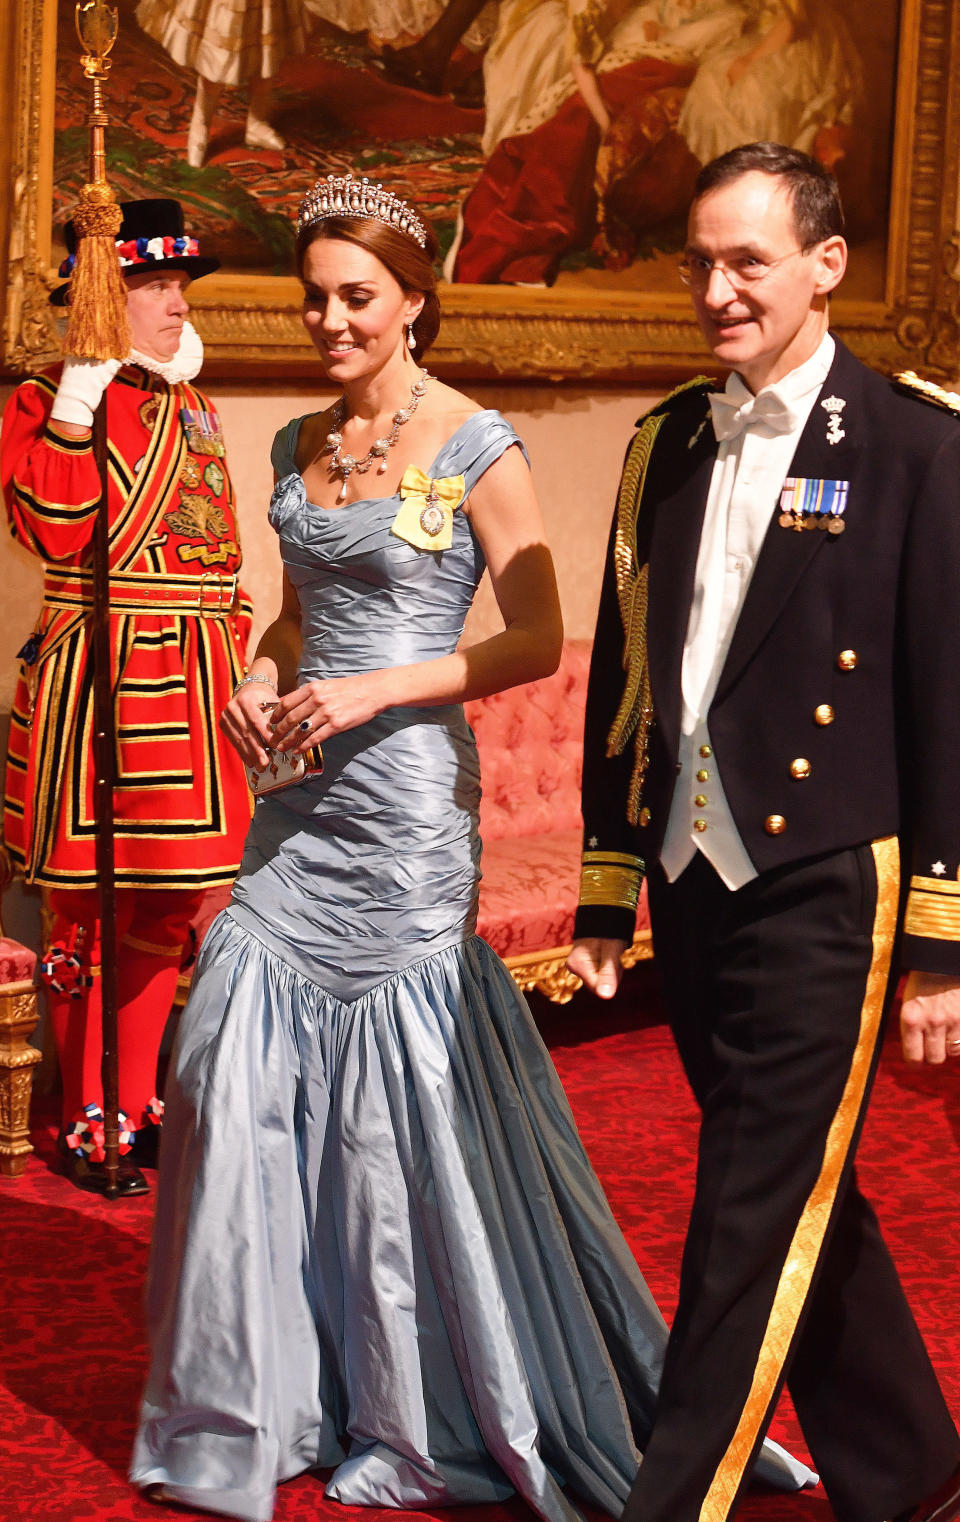 Kate walks with Rear Adm. Ludger Brummelaar&nbsp;at a state banquet in honor of King Willem-Alexander and Queen Maxima of the Netherlands at Buckingham Palace on Oct. 23, 2018. (Photo: JOHN STILLWELL via Getty Images)